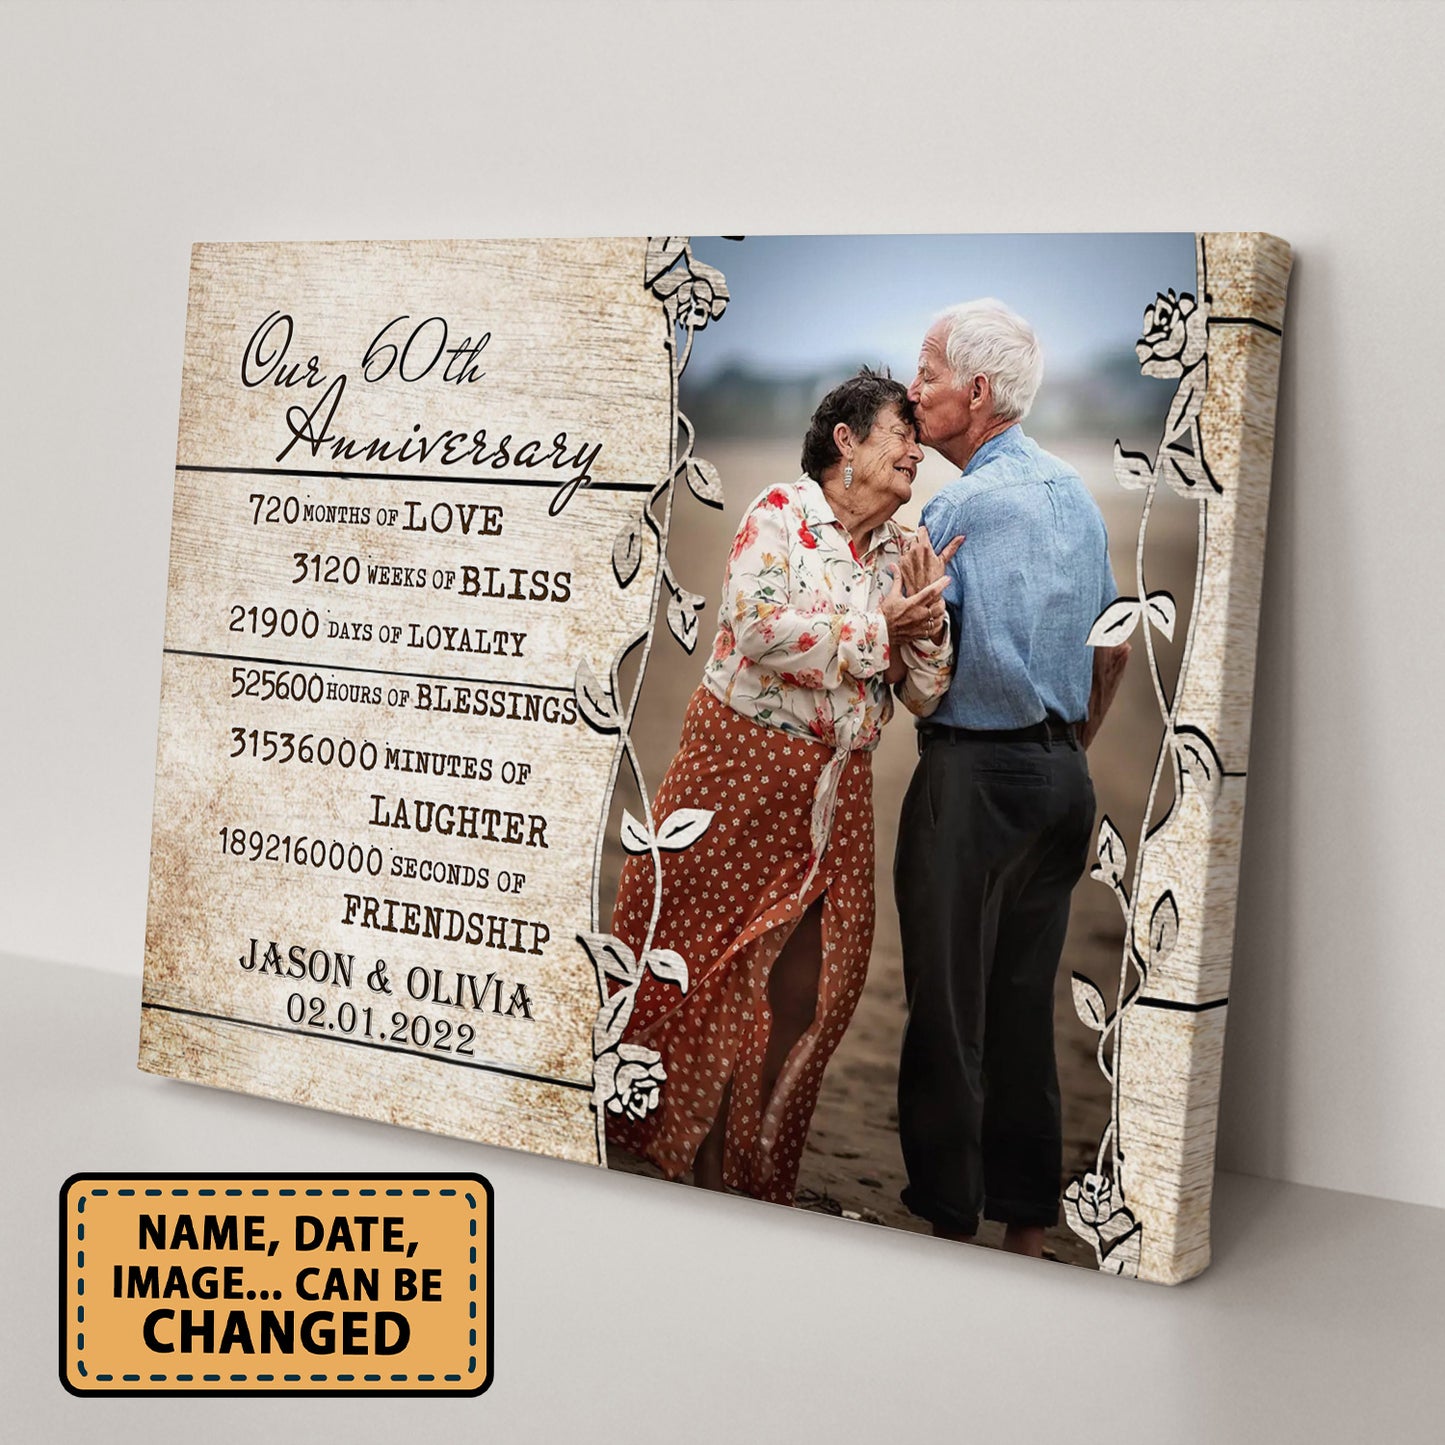 Our 60th Anniversary Timeless love Valentine Gift Personalized Canvas